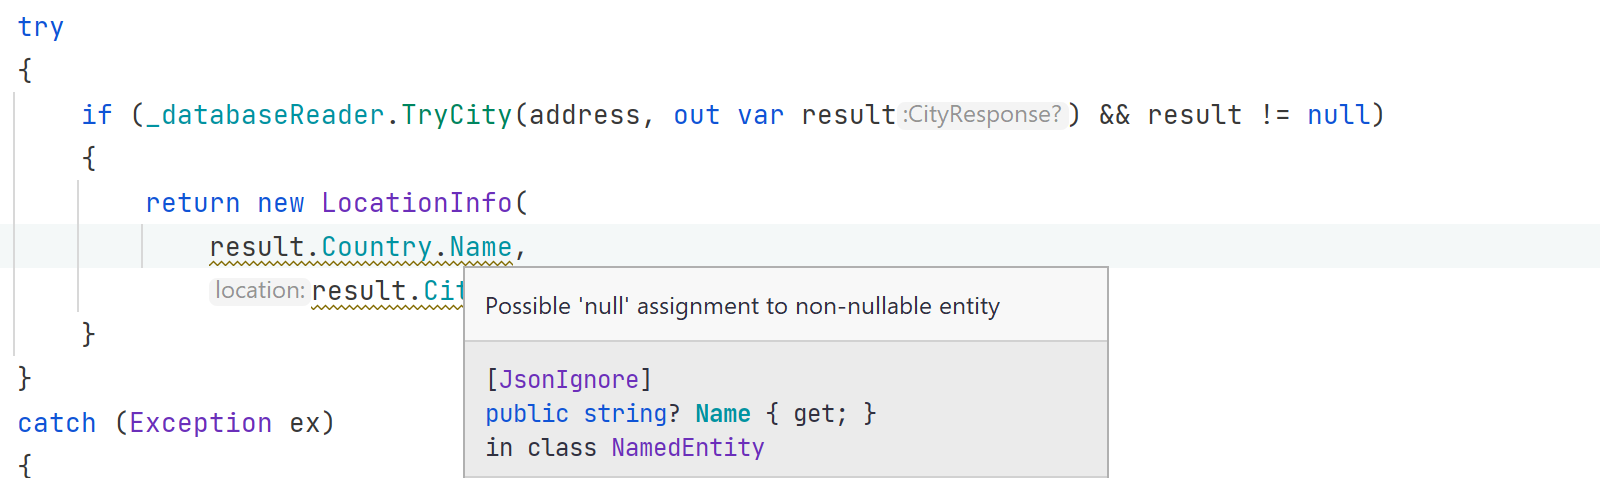 Possible 'null' assignment to non-nullable entity